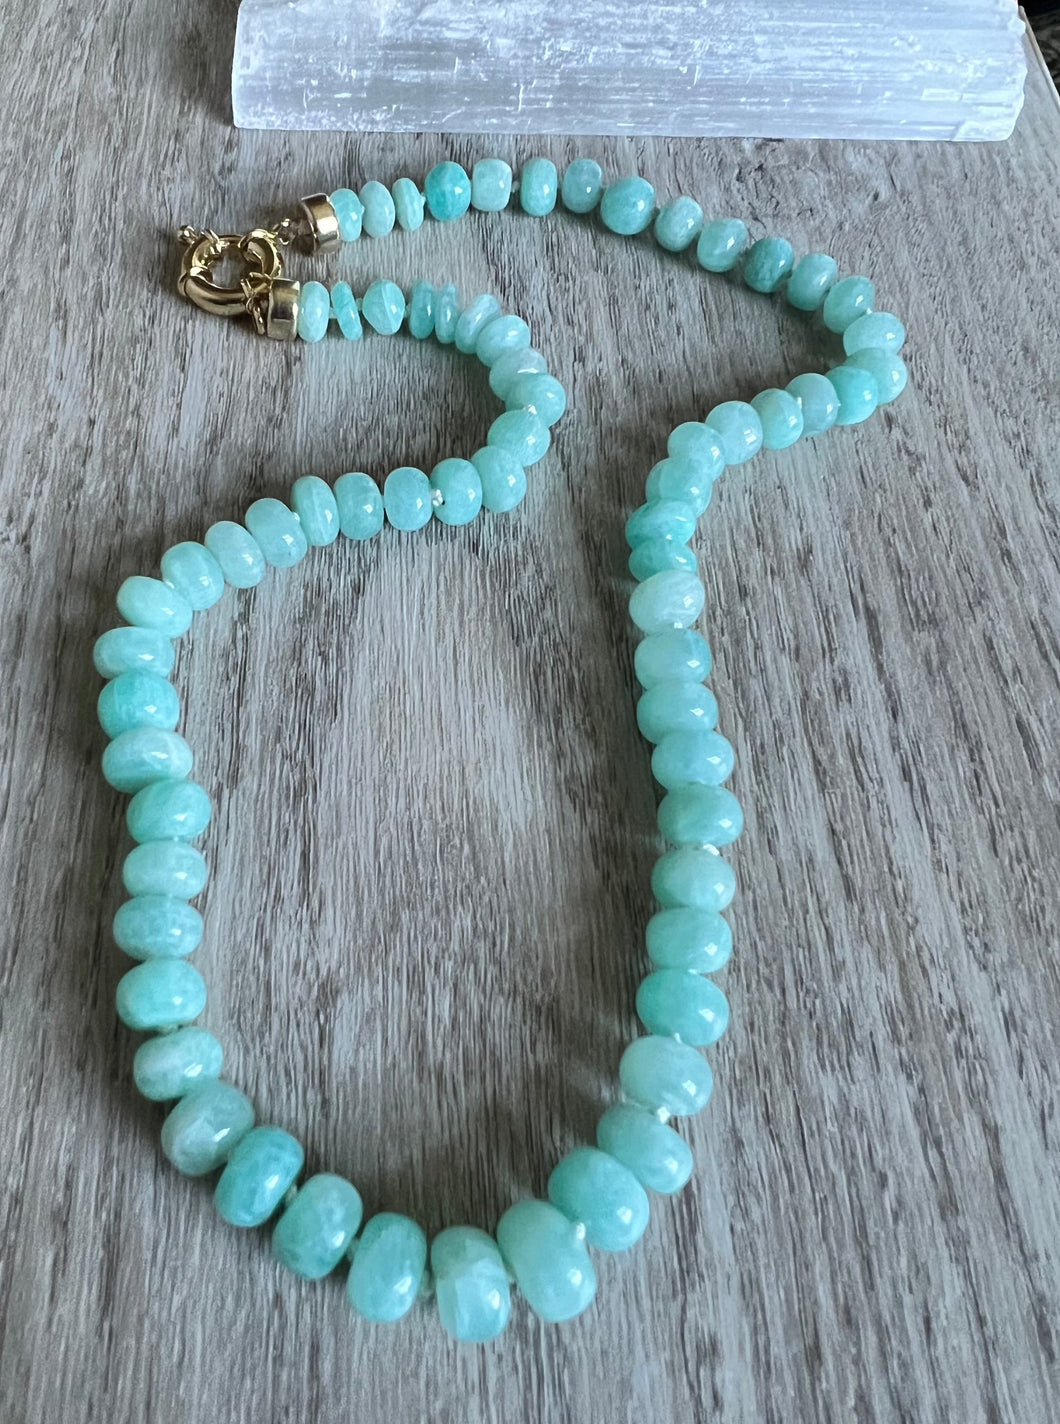 Hand knotted on white silk thread these 8mm natural Amazonite stones are knock outs.  This necklace can be styled for all seasons and will be sure to draw compliments.   It measures 18 inches and is finished off with gold filled end caps and a gold filled sailor clasp to allow for easy on and off and to add or remove your favorite charm 